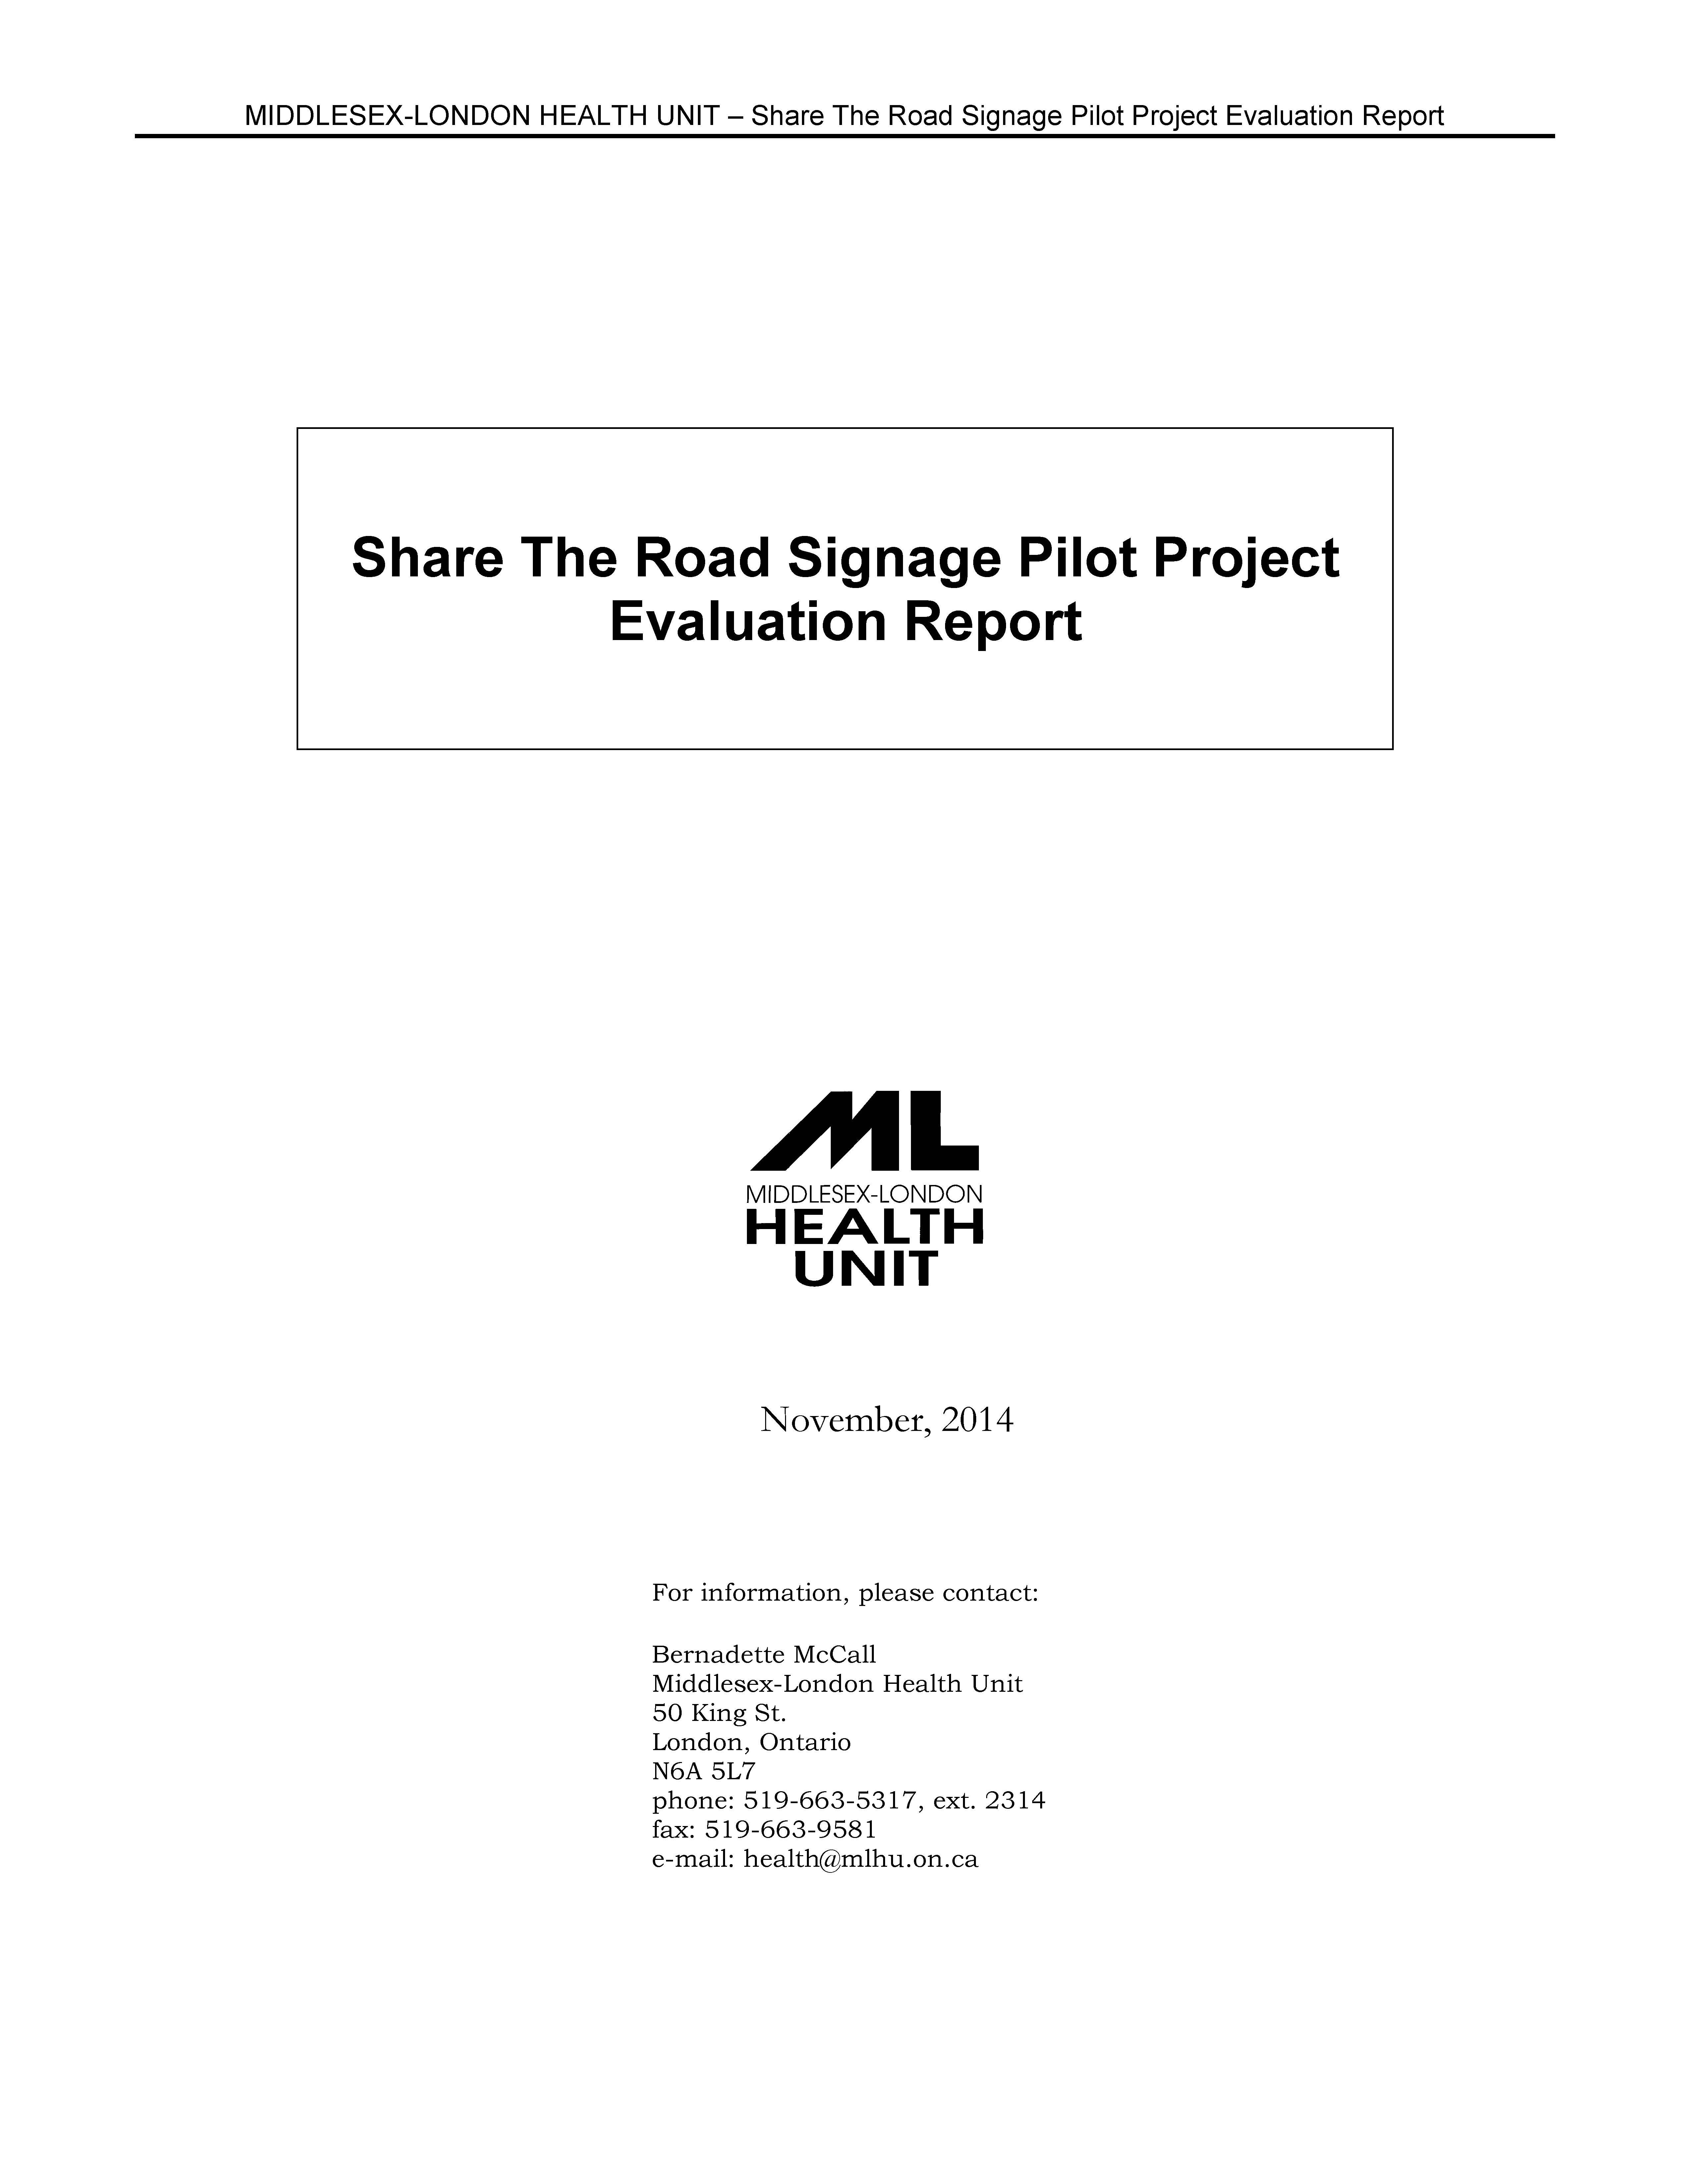 Share the Road Signage Pilot Project - Evaluation Report